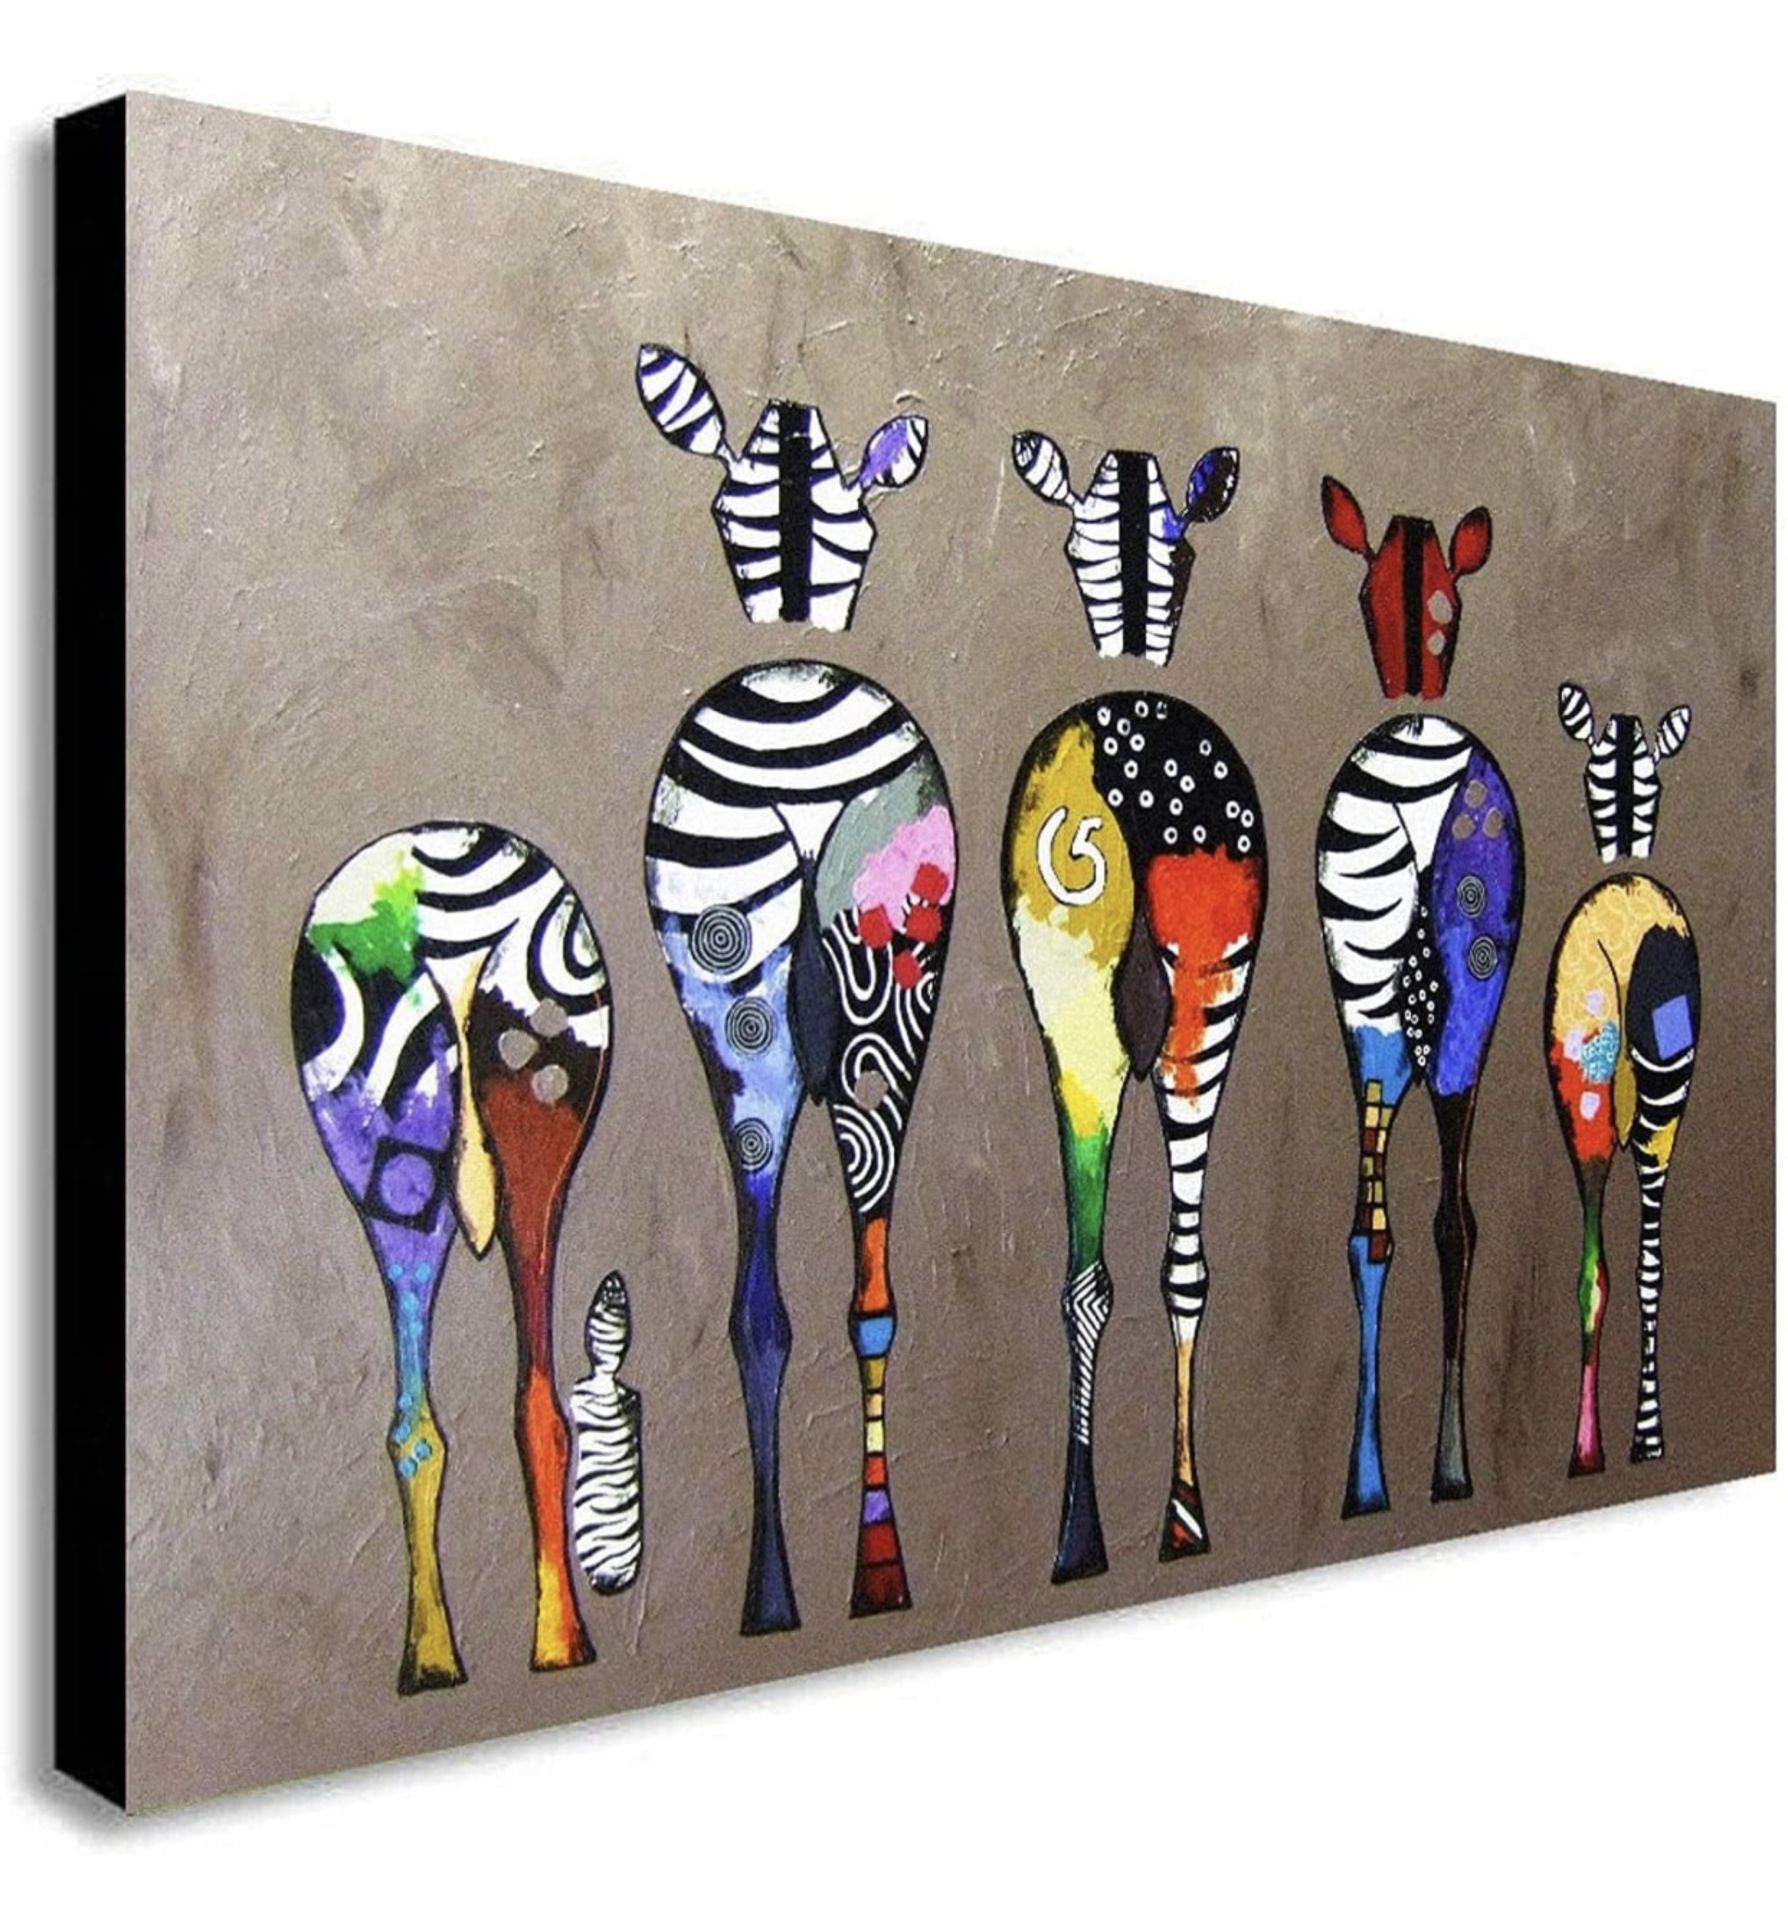 Zebras Abstract Colourful Canvas Wall Art 32 x 24 Inch RRP £37.99